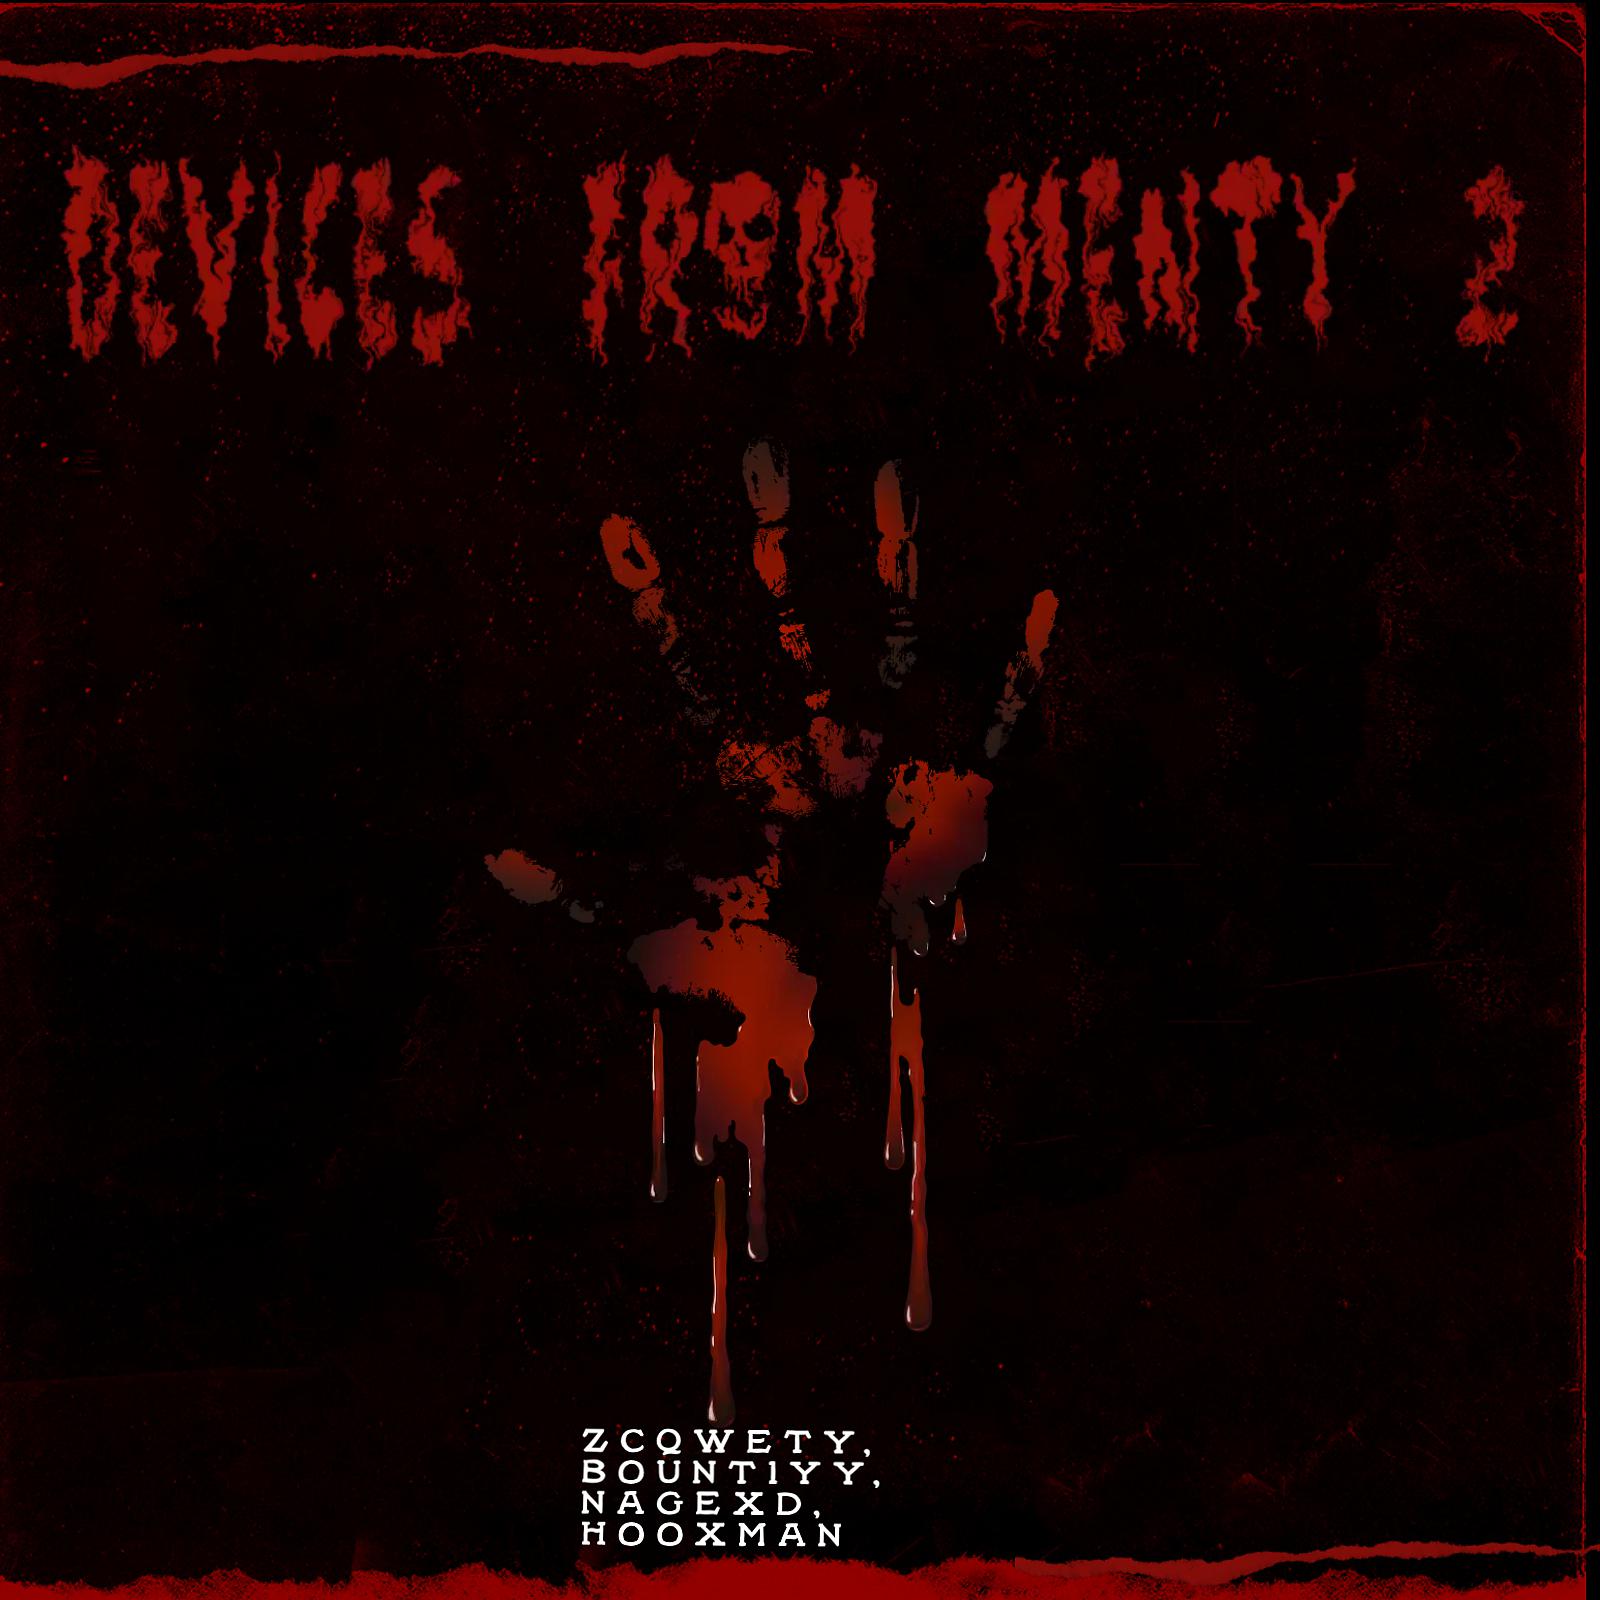 Постер альбома Devices from Menty 2 (feat. Bount1yy, Hooxman, Nagexd)